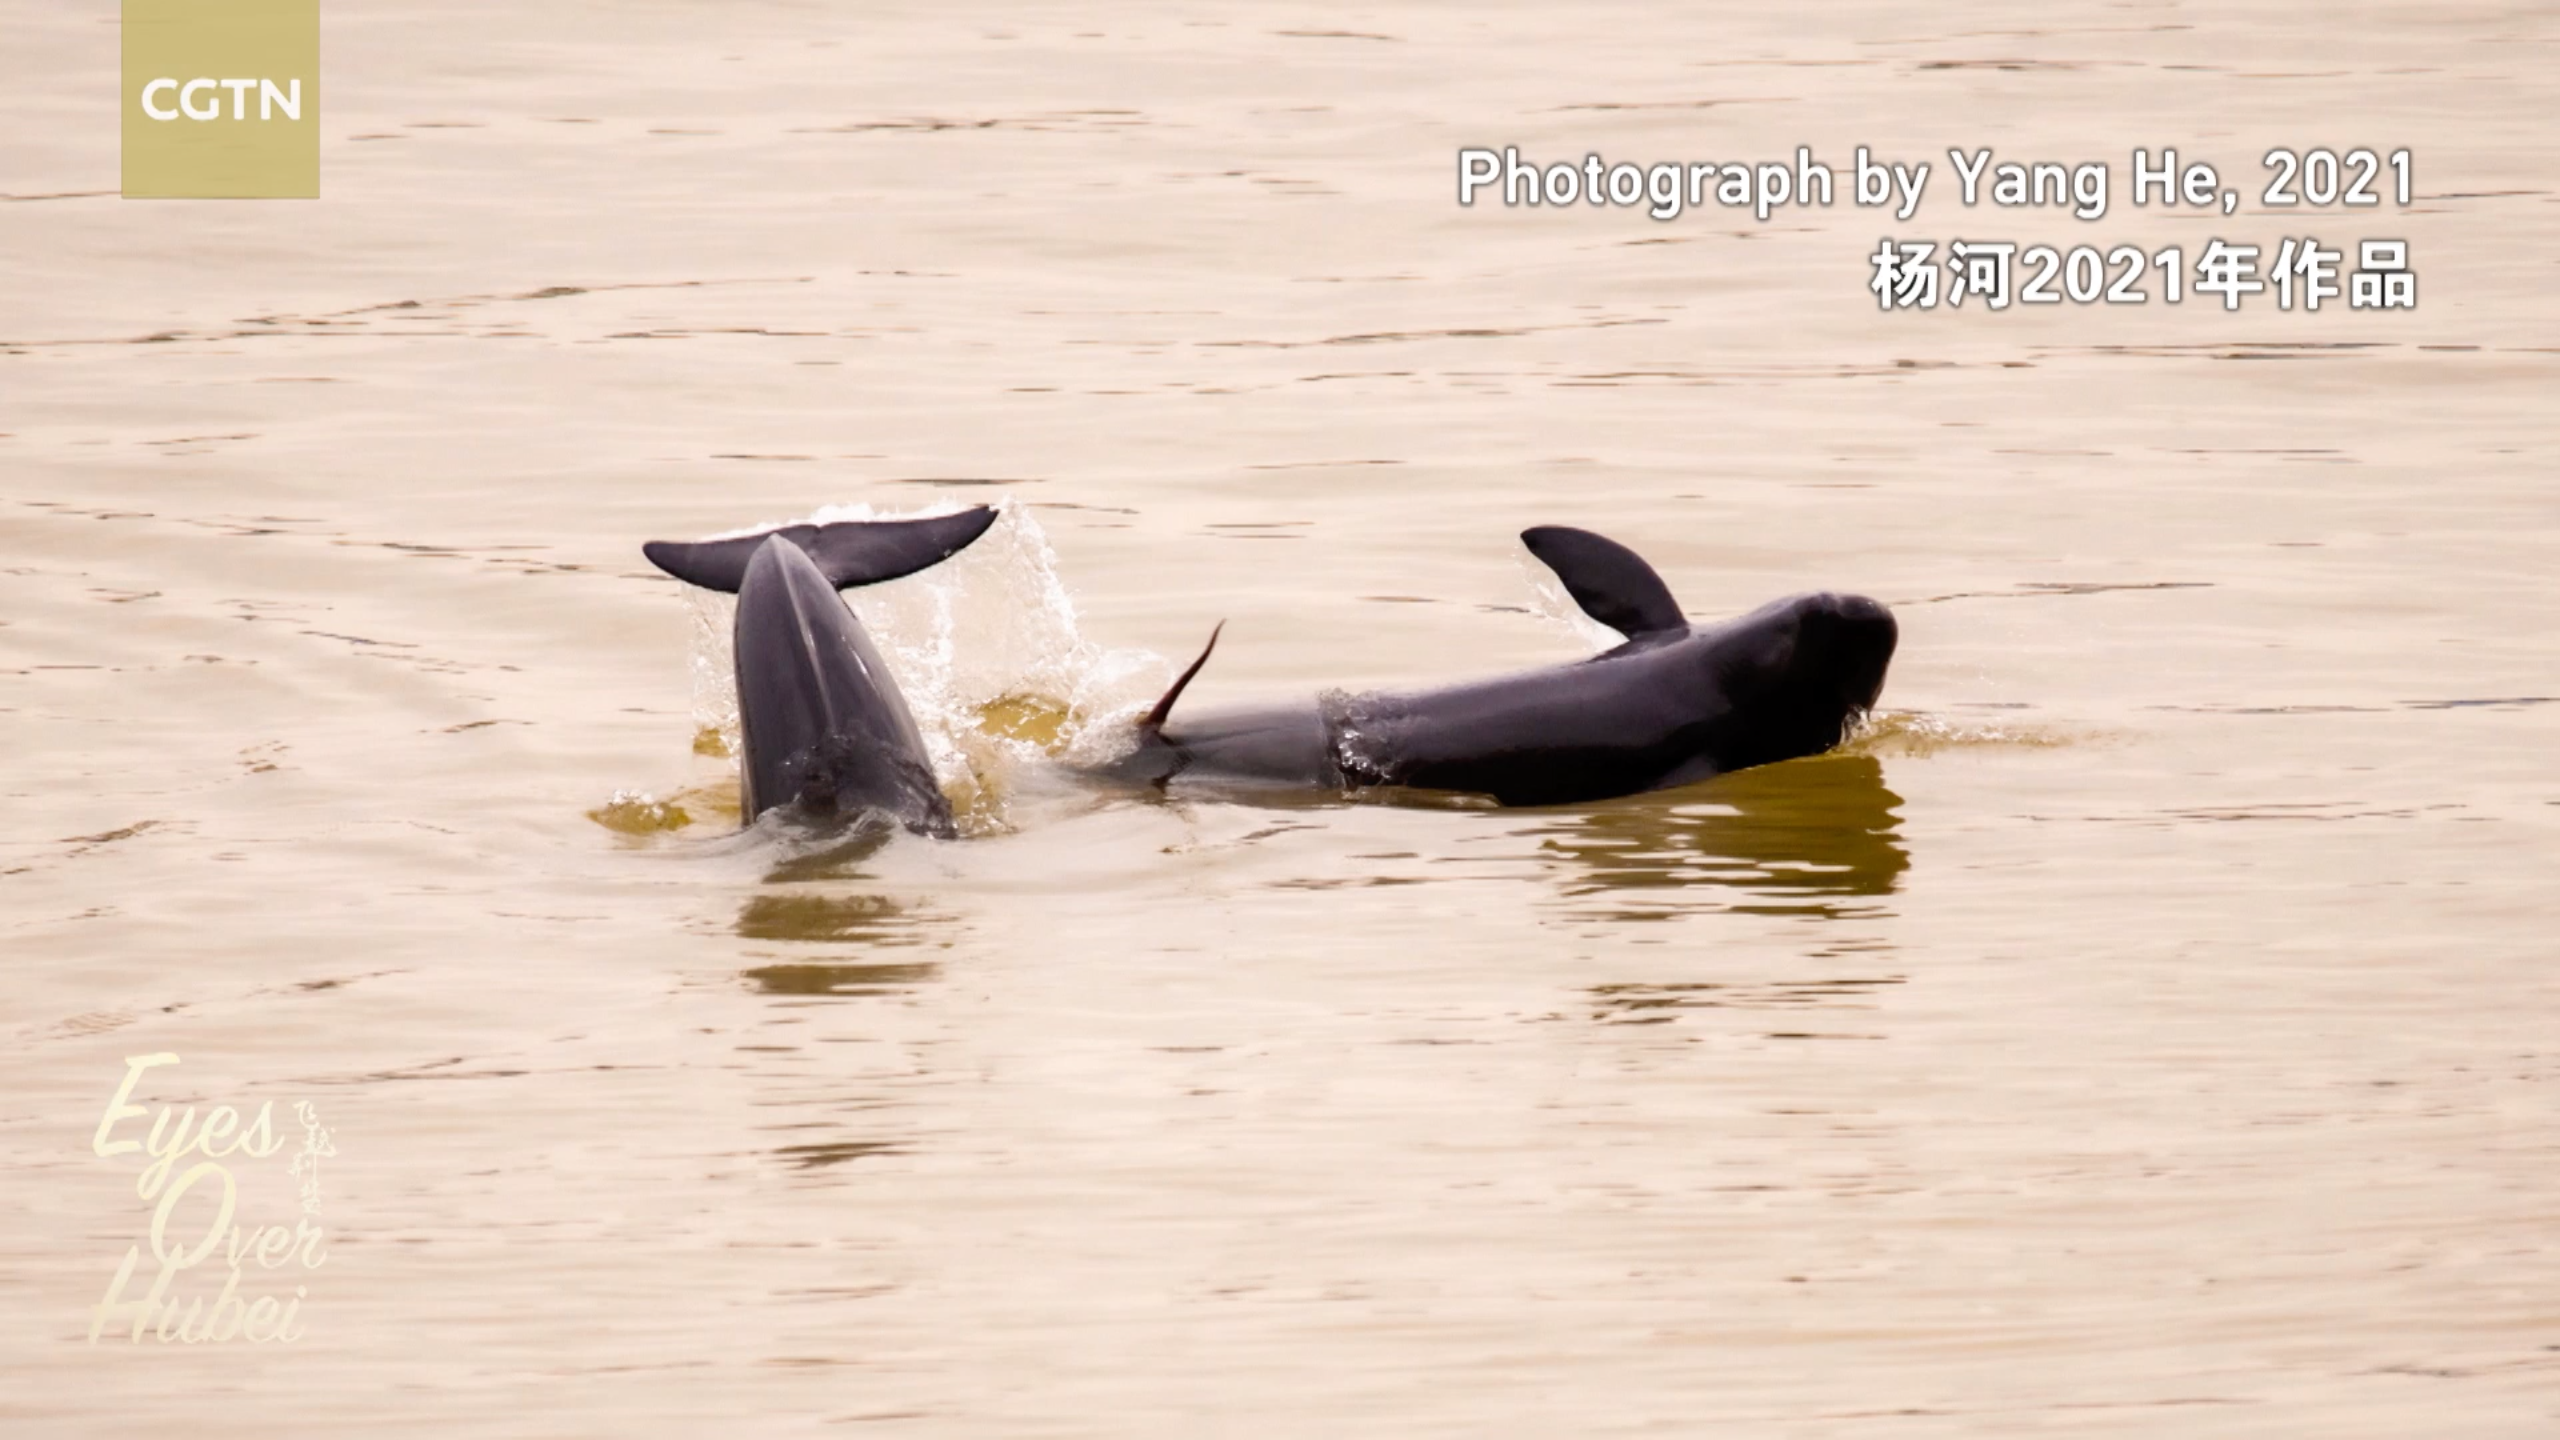 Two Yangtze finless porpoise jumps out of the water, 2021. /Photographed by Yang He